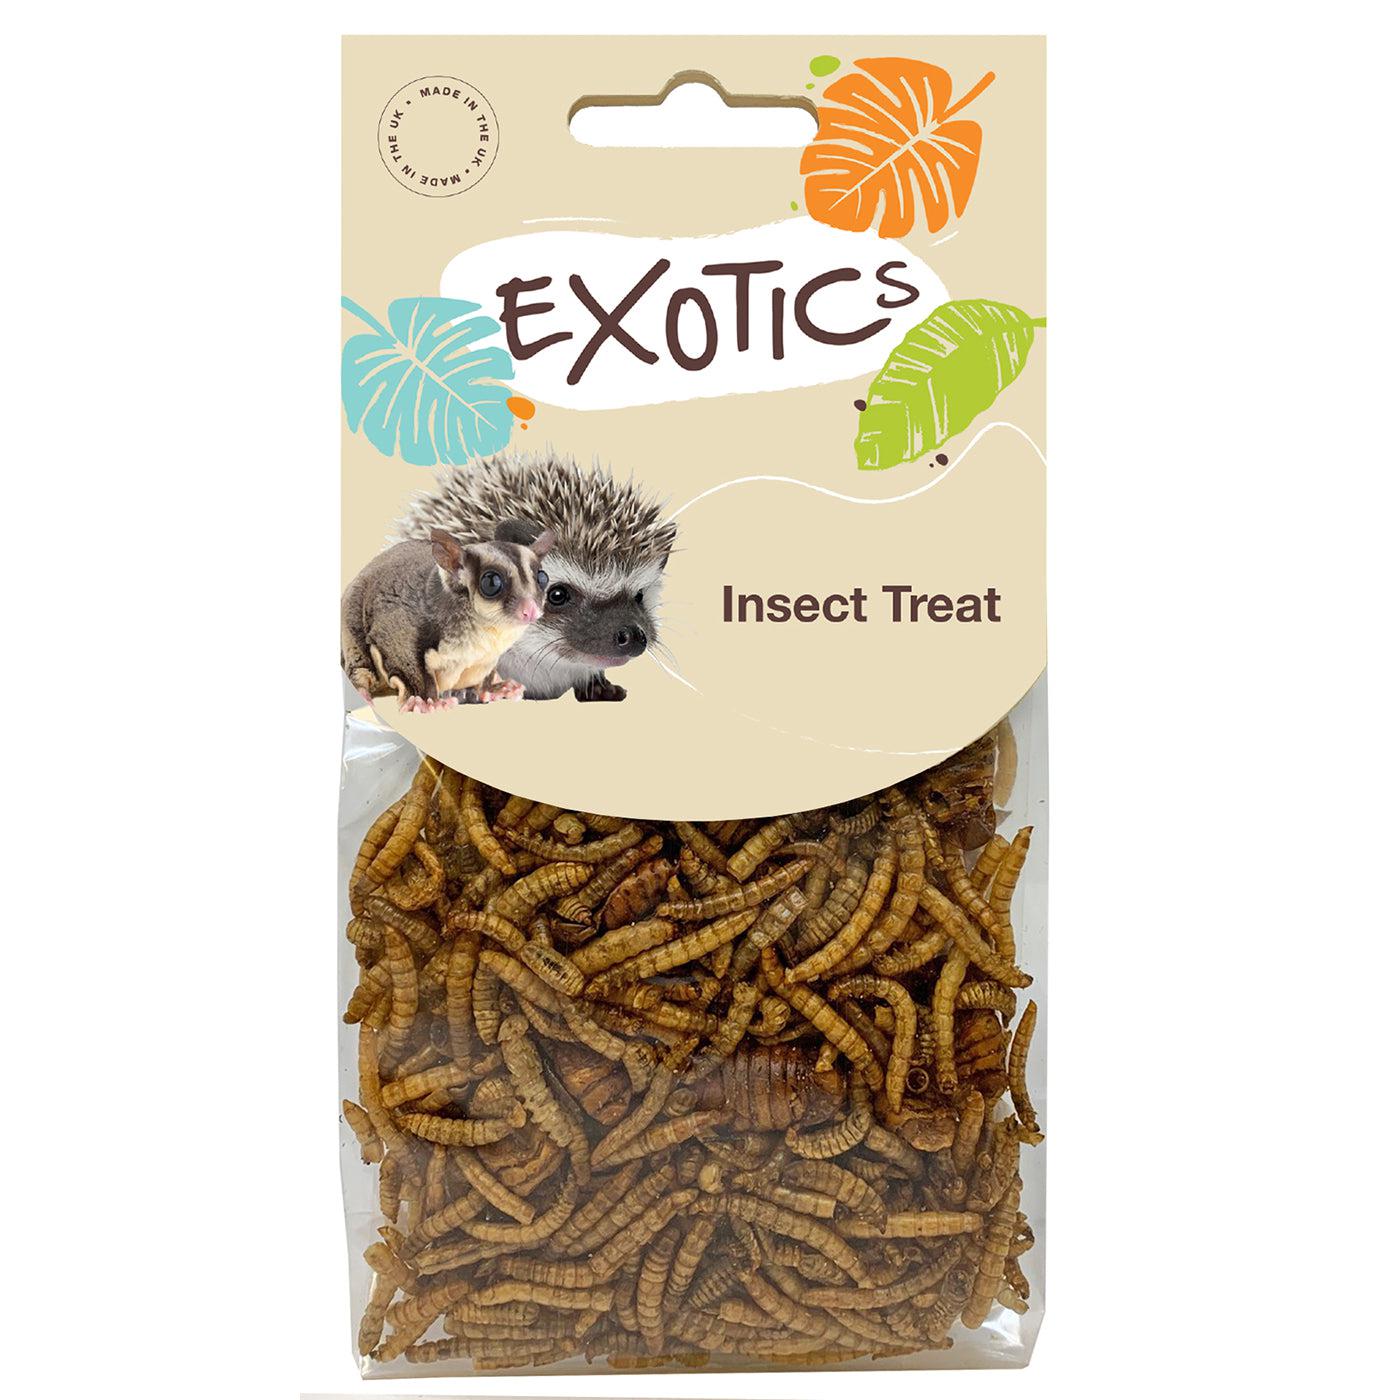 Natures Grub Pygmy Hedgehog Insect Treat 35g